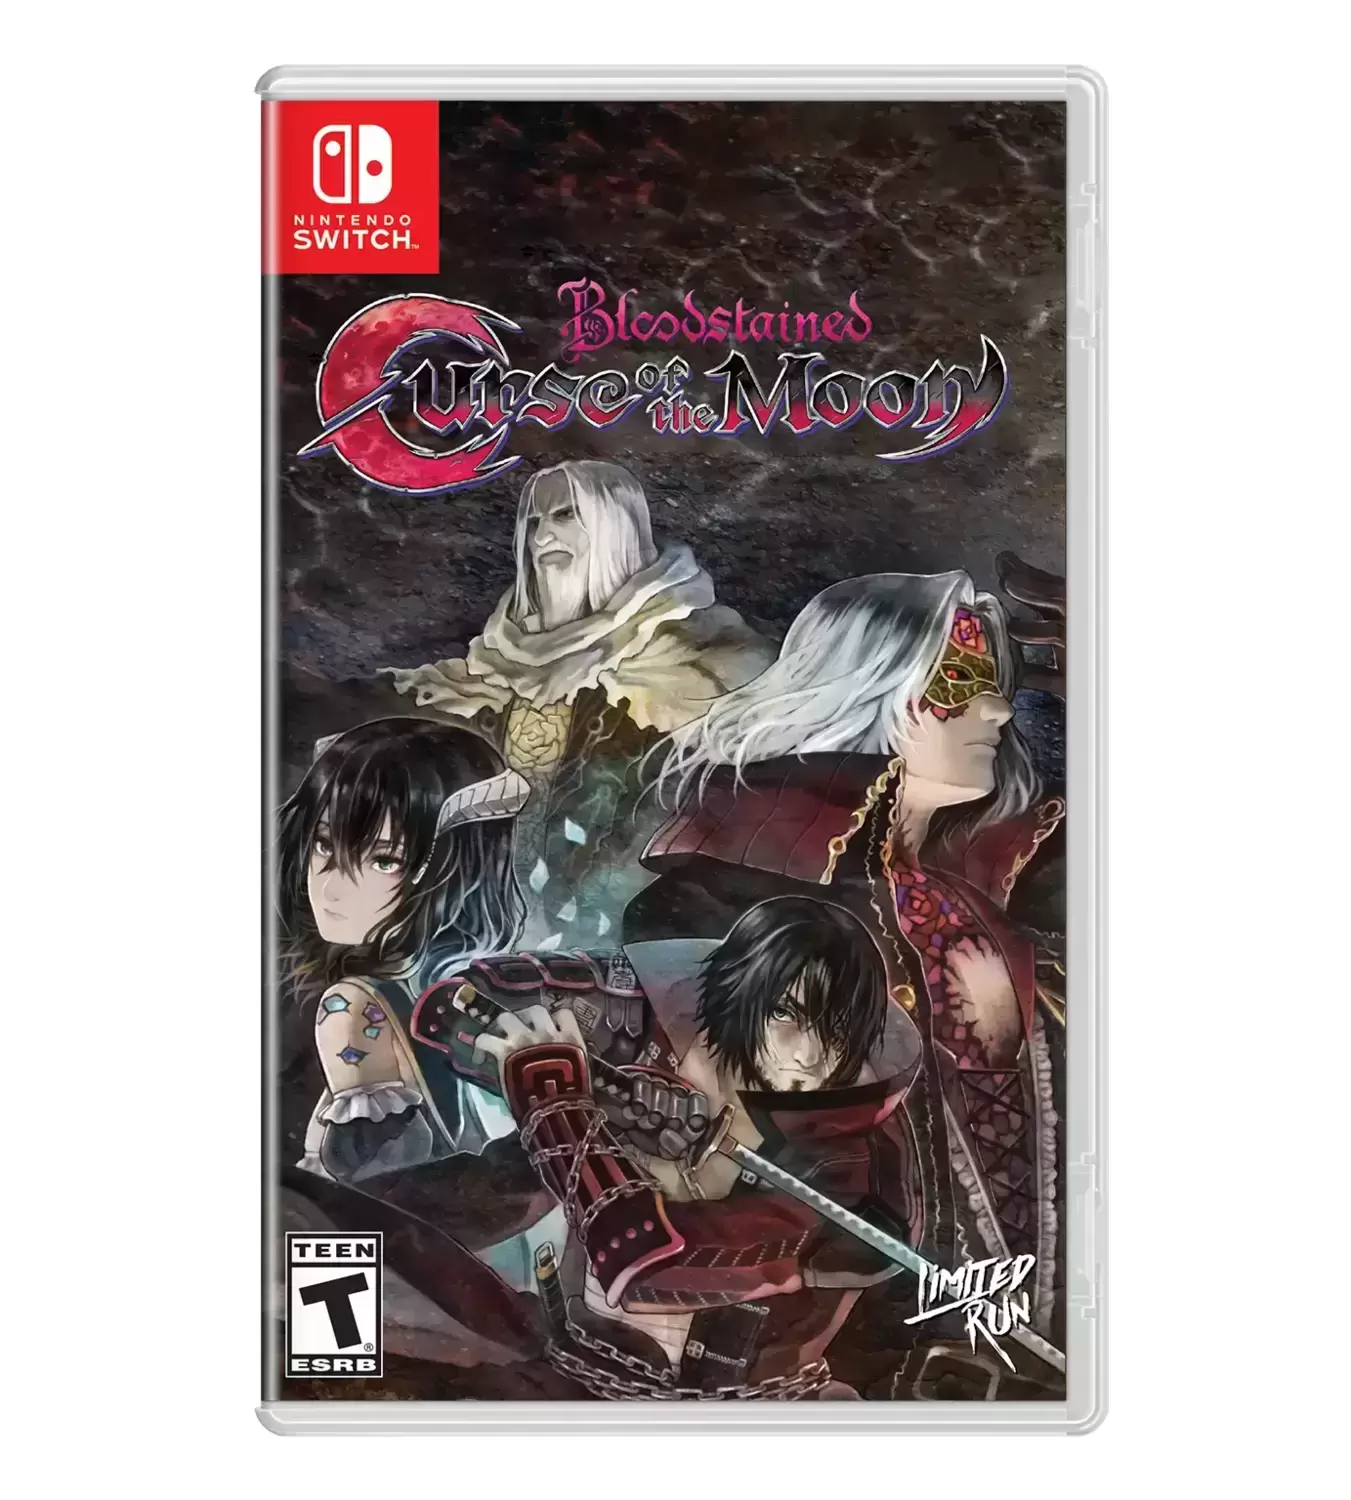 Nintendo Switch Games - Bloodstained: Curse of the moon - Best buy cover